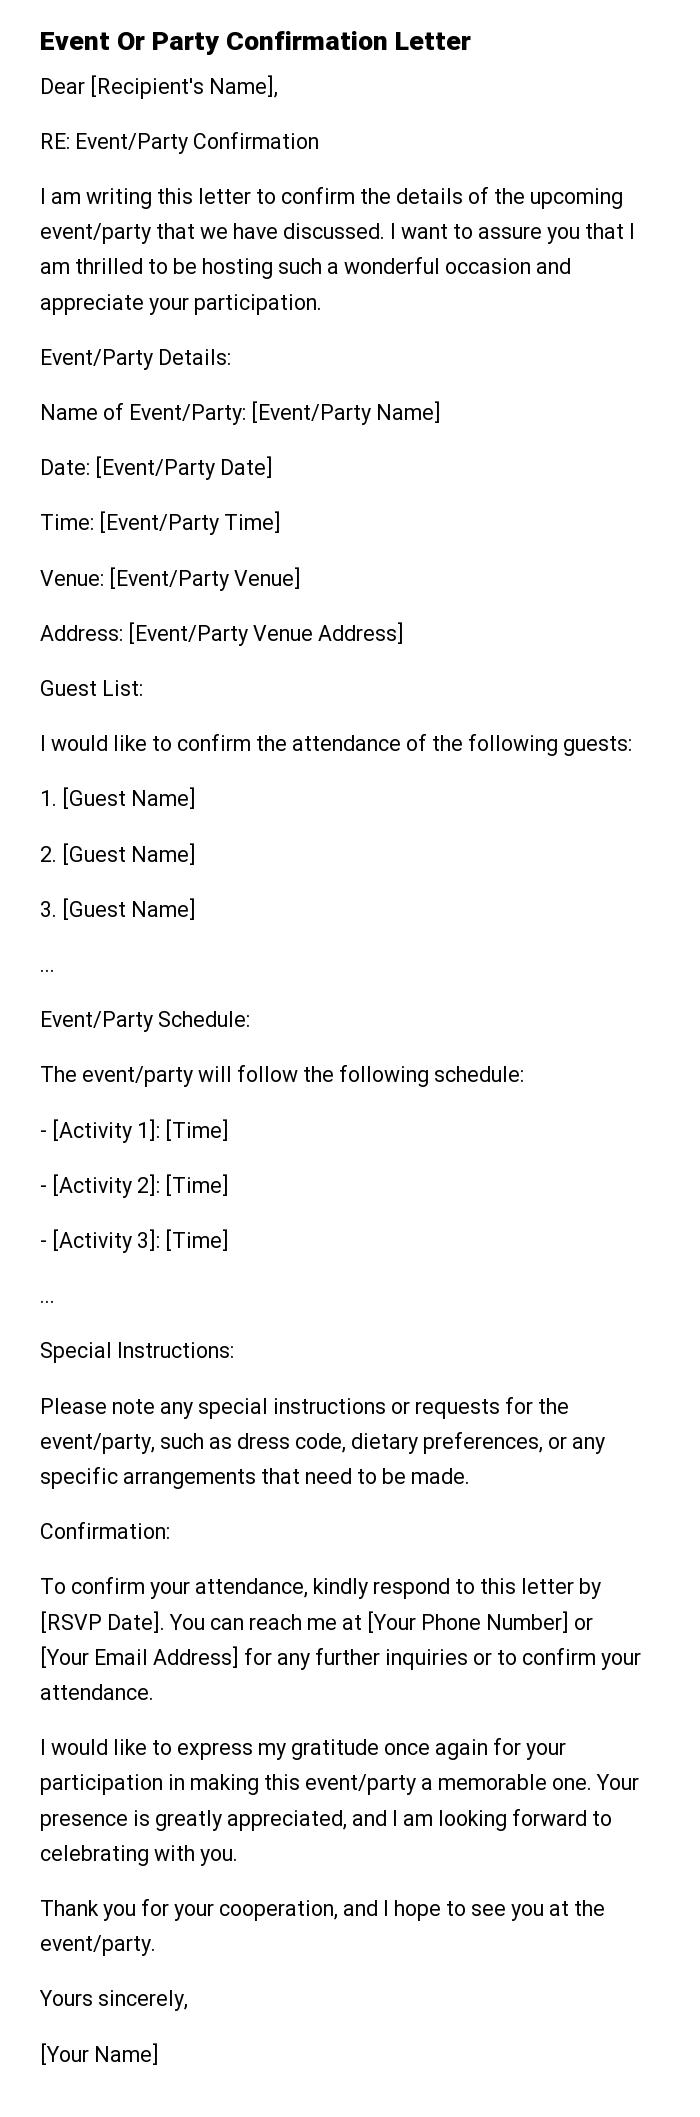 Event Or Party Confirmation Letter